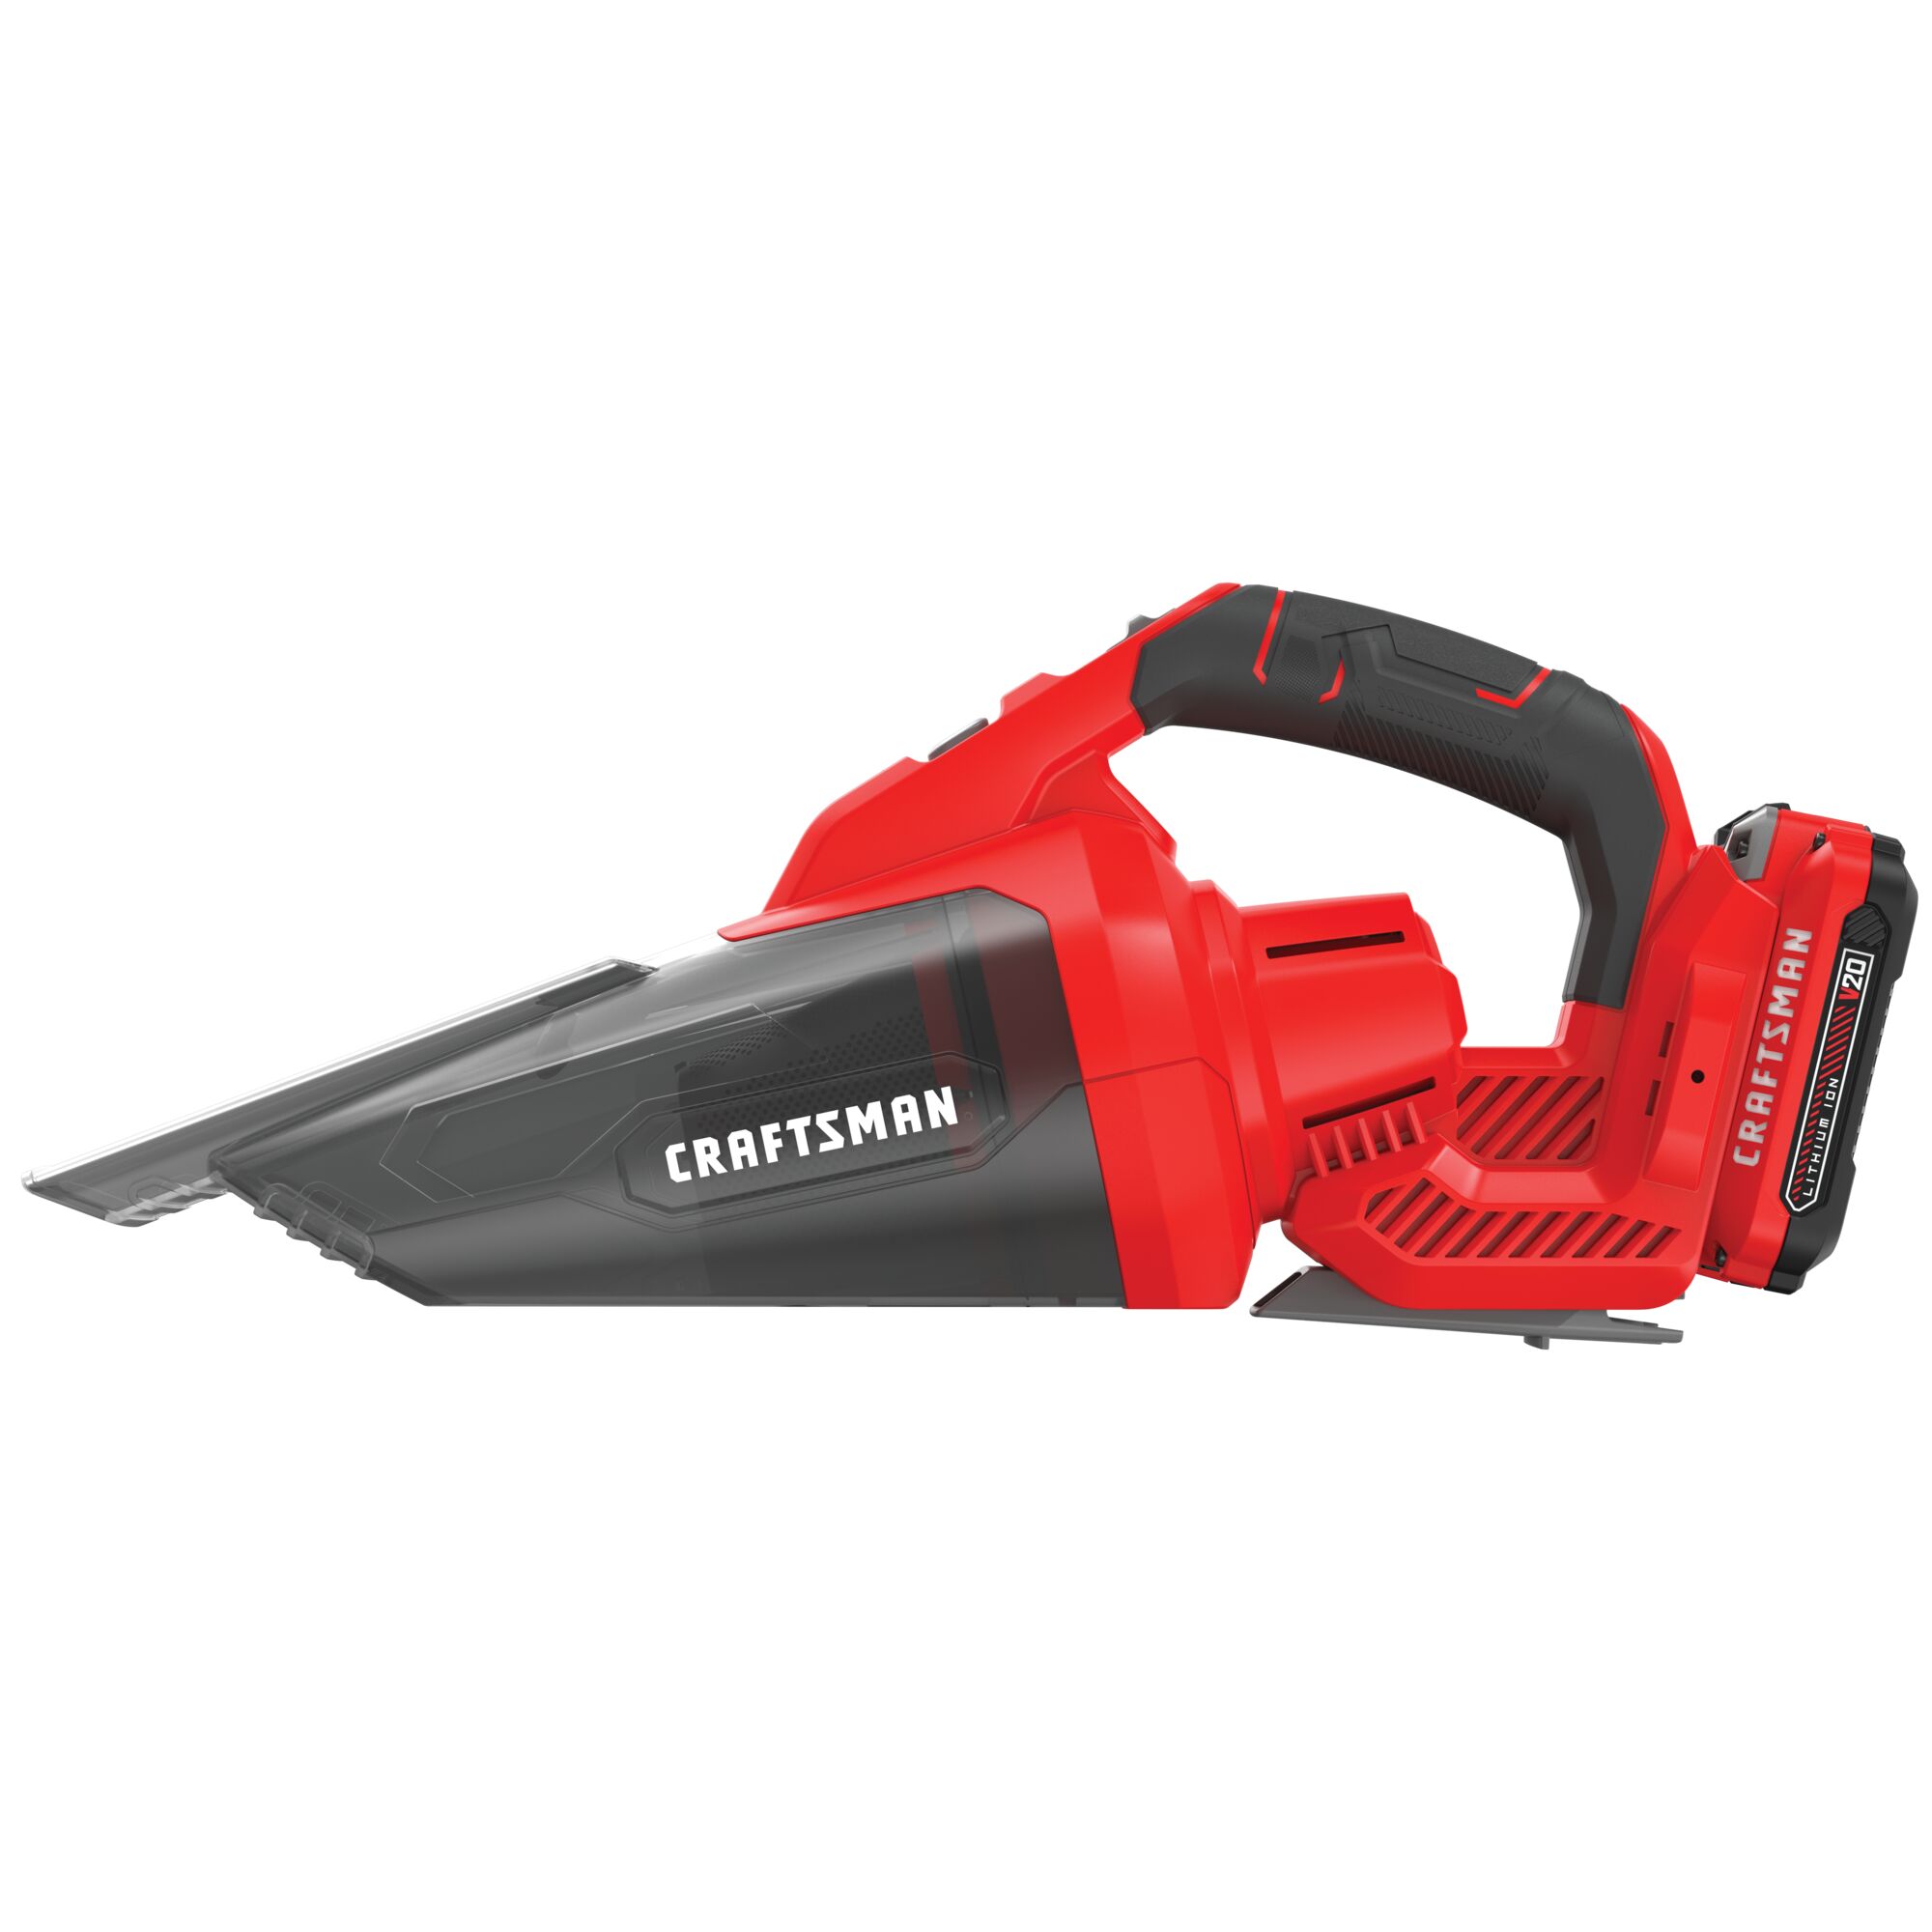 View of CRAFTSMAN Cleaning: Dust & Debris Collection on white background